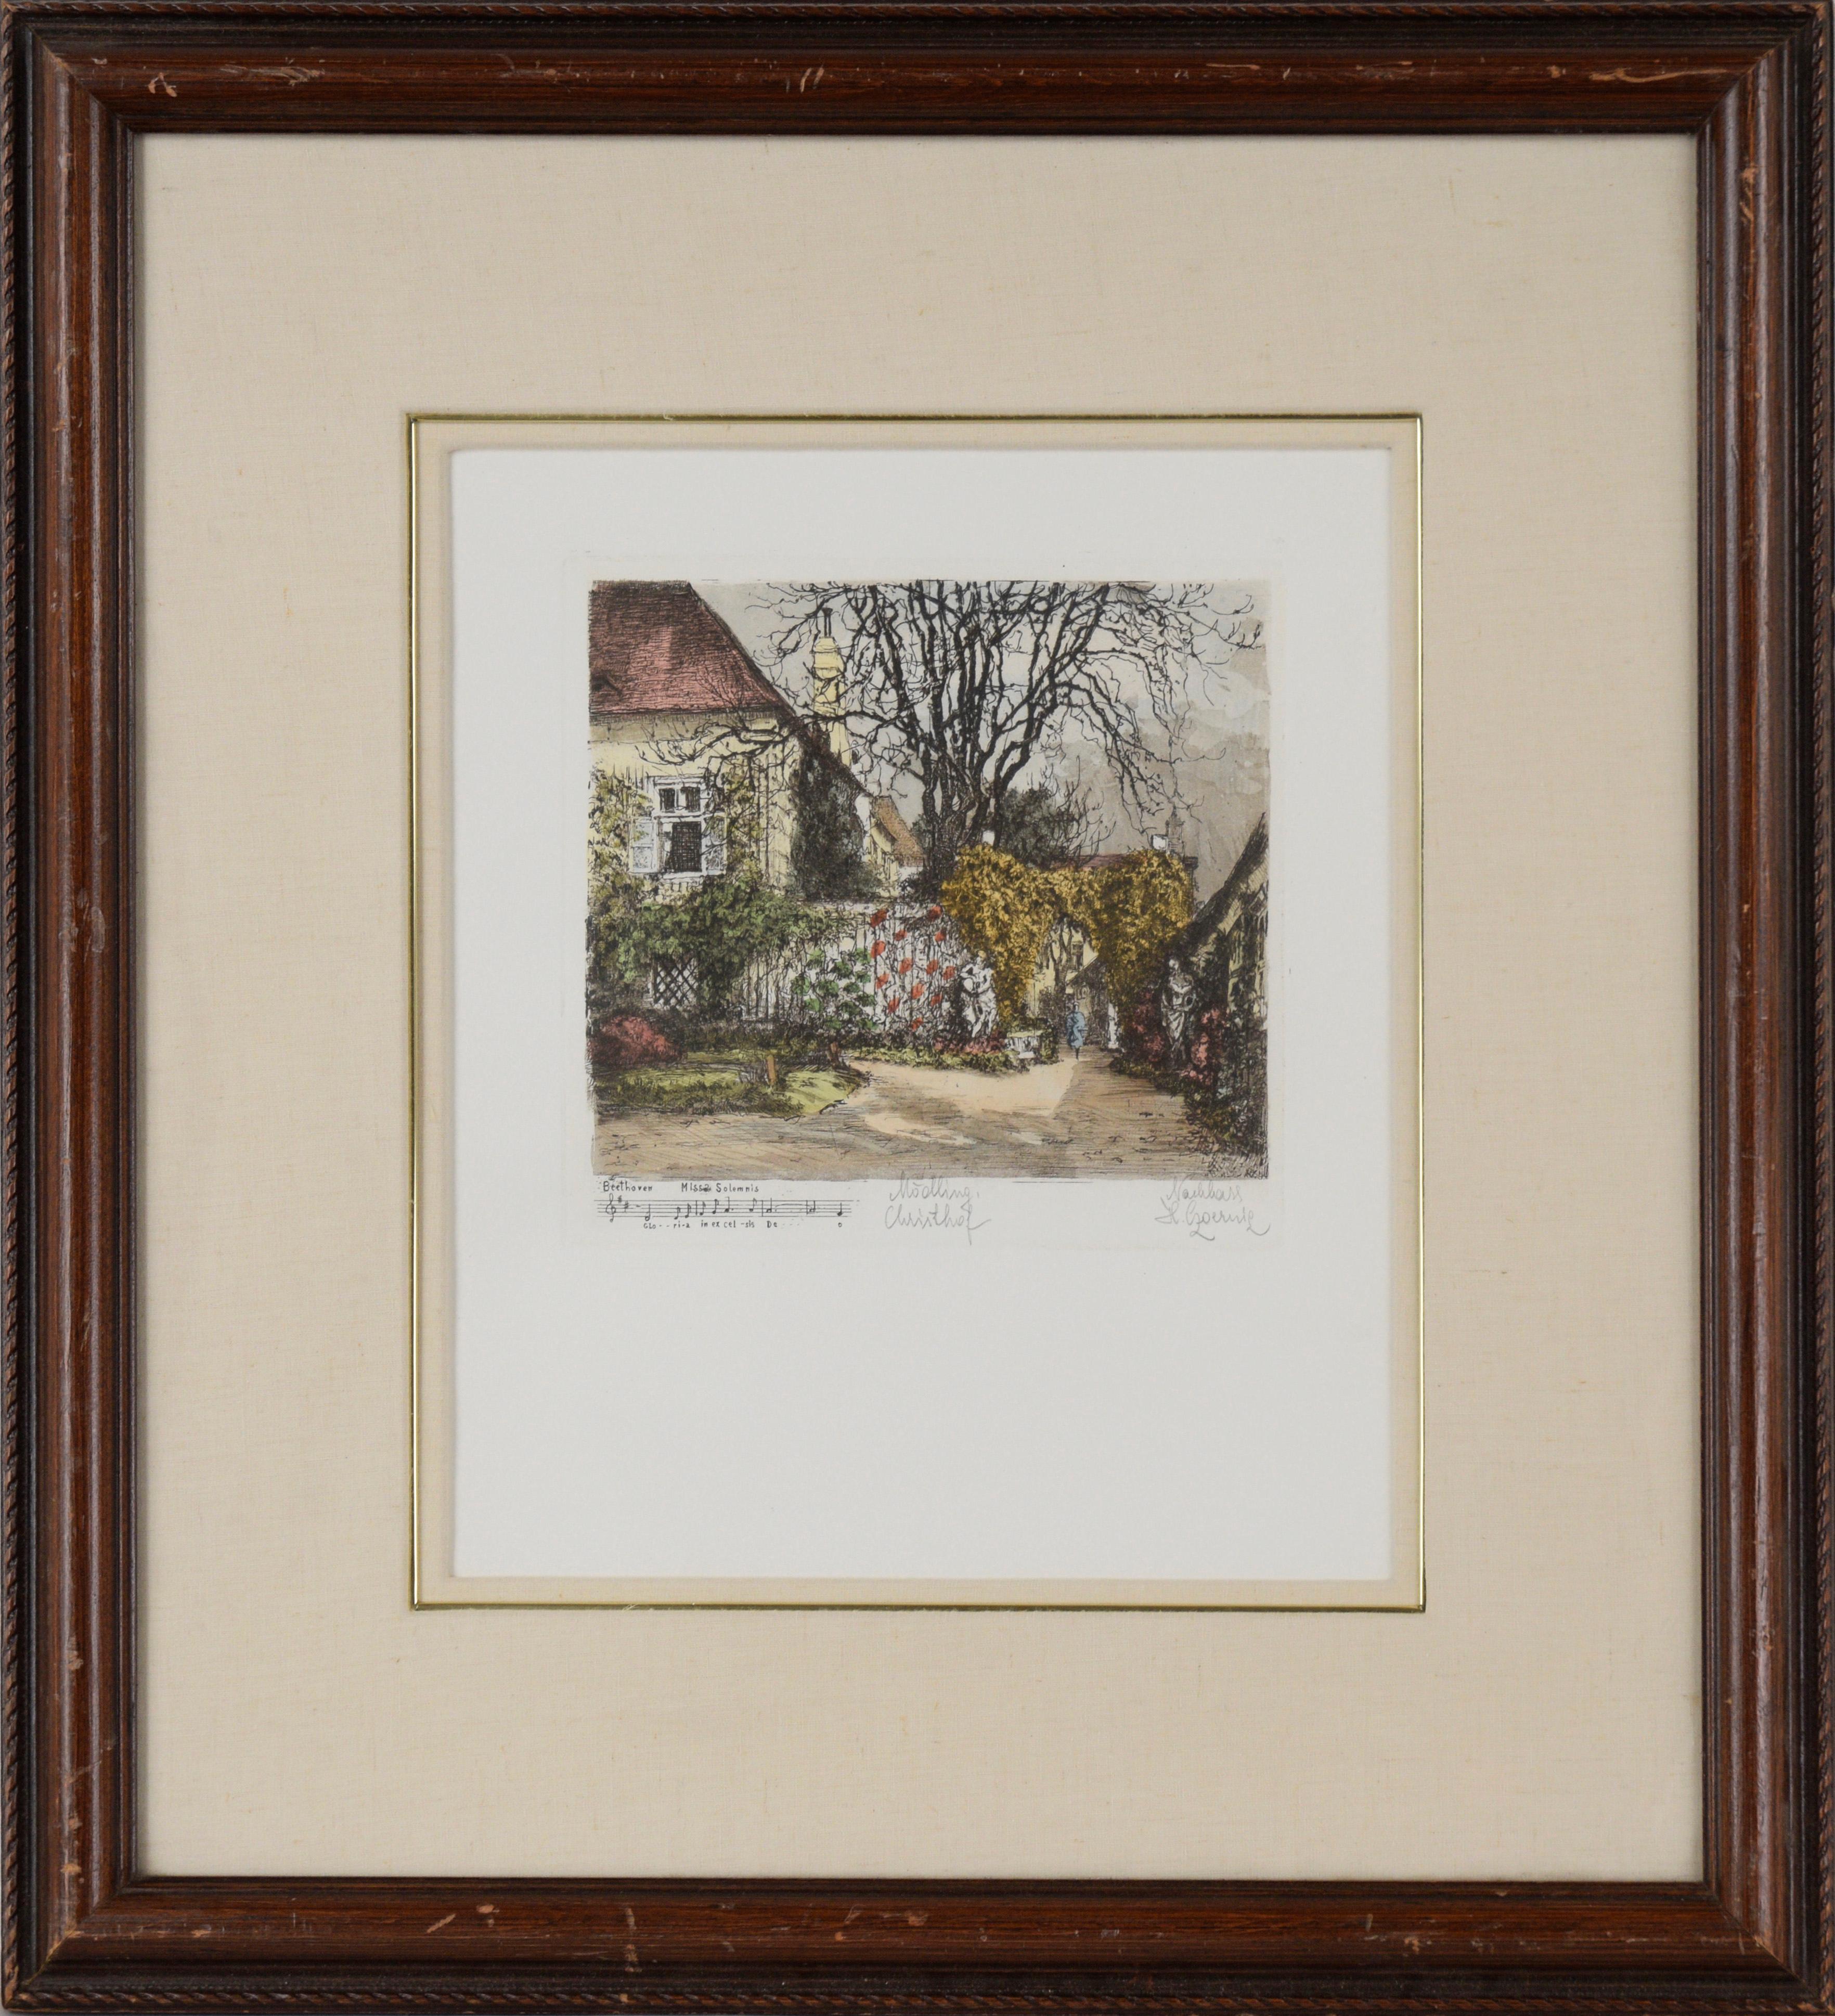 Beethovens Residence at Mödling - Vintage Colored Etching by Henry Goering WWII

Hand colored etching of the Christof House (the Yard of Christ) by Henry Goering (German/American, 1871-1944). The viewer stands, looking to the front of the white